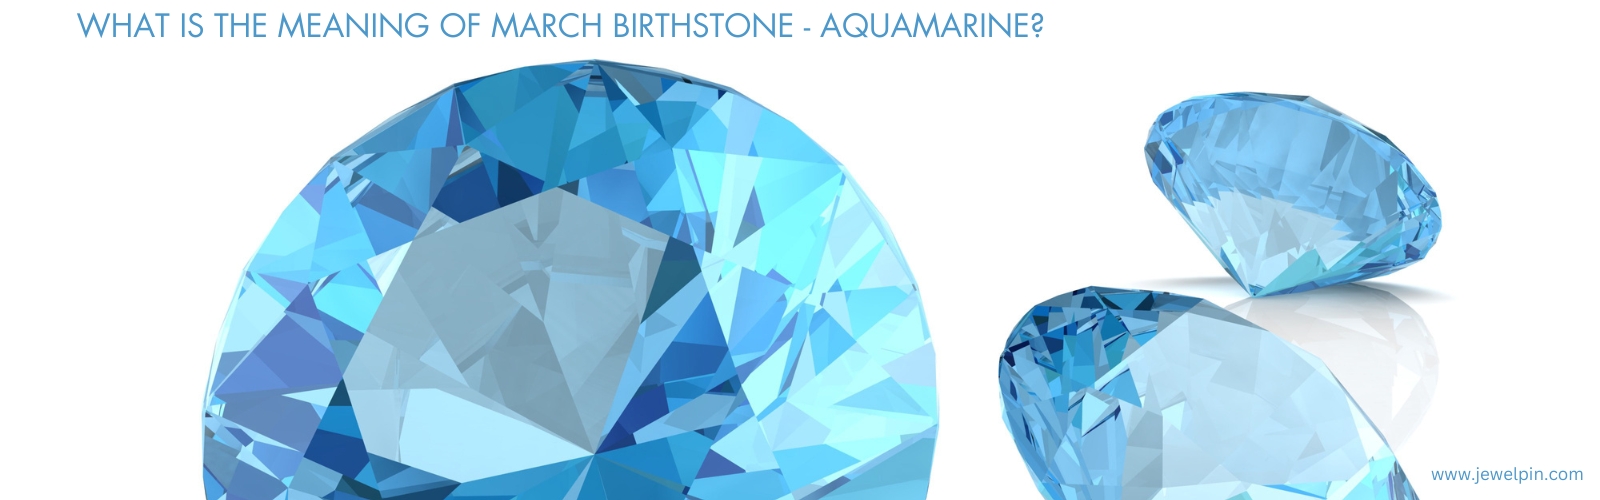 what is the meaning of march birthstone aquamarine